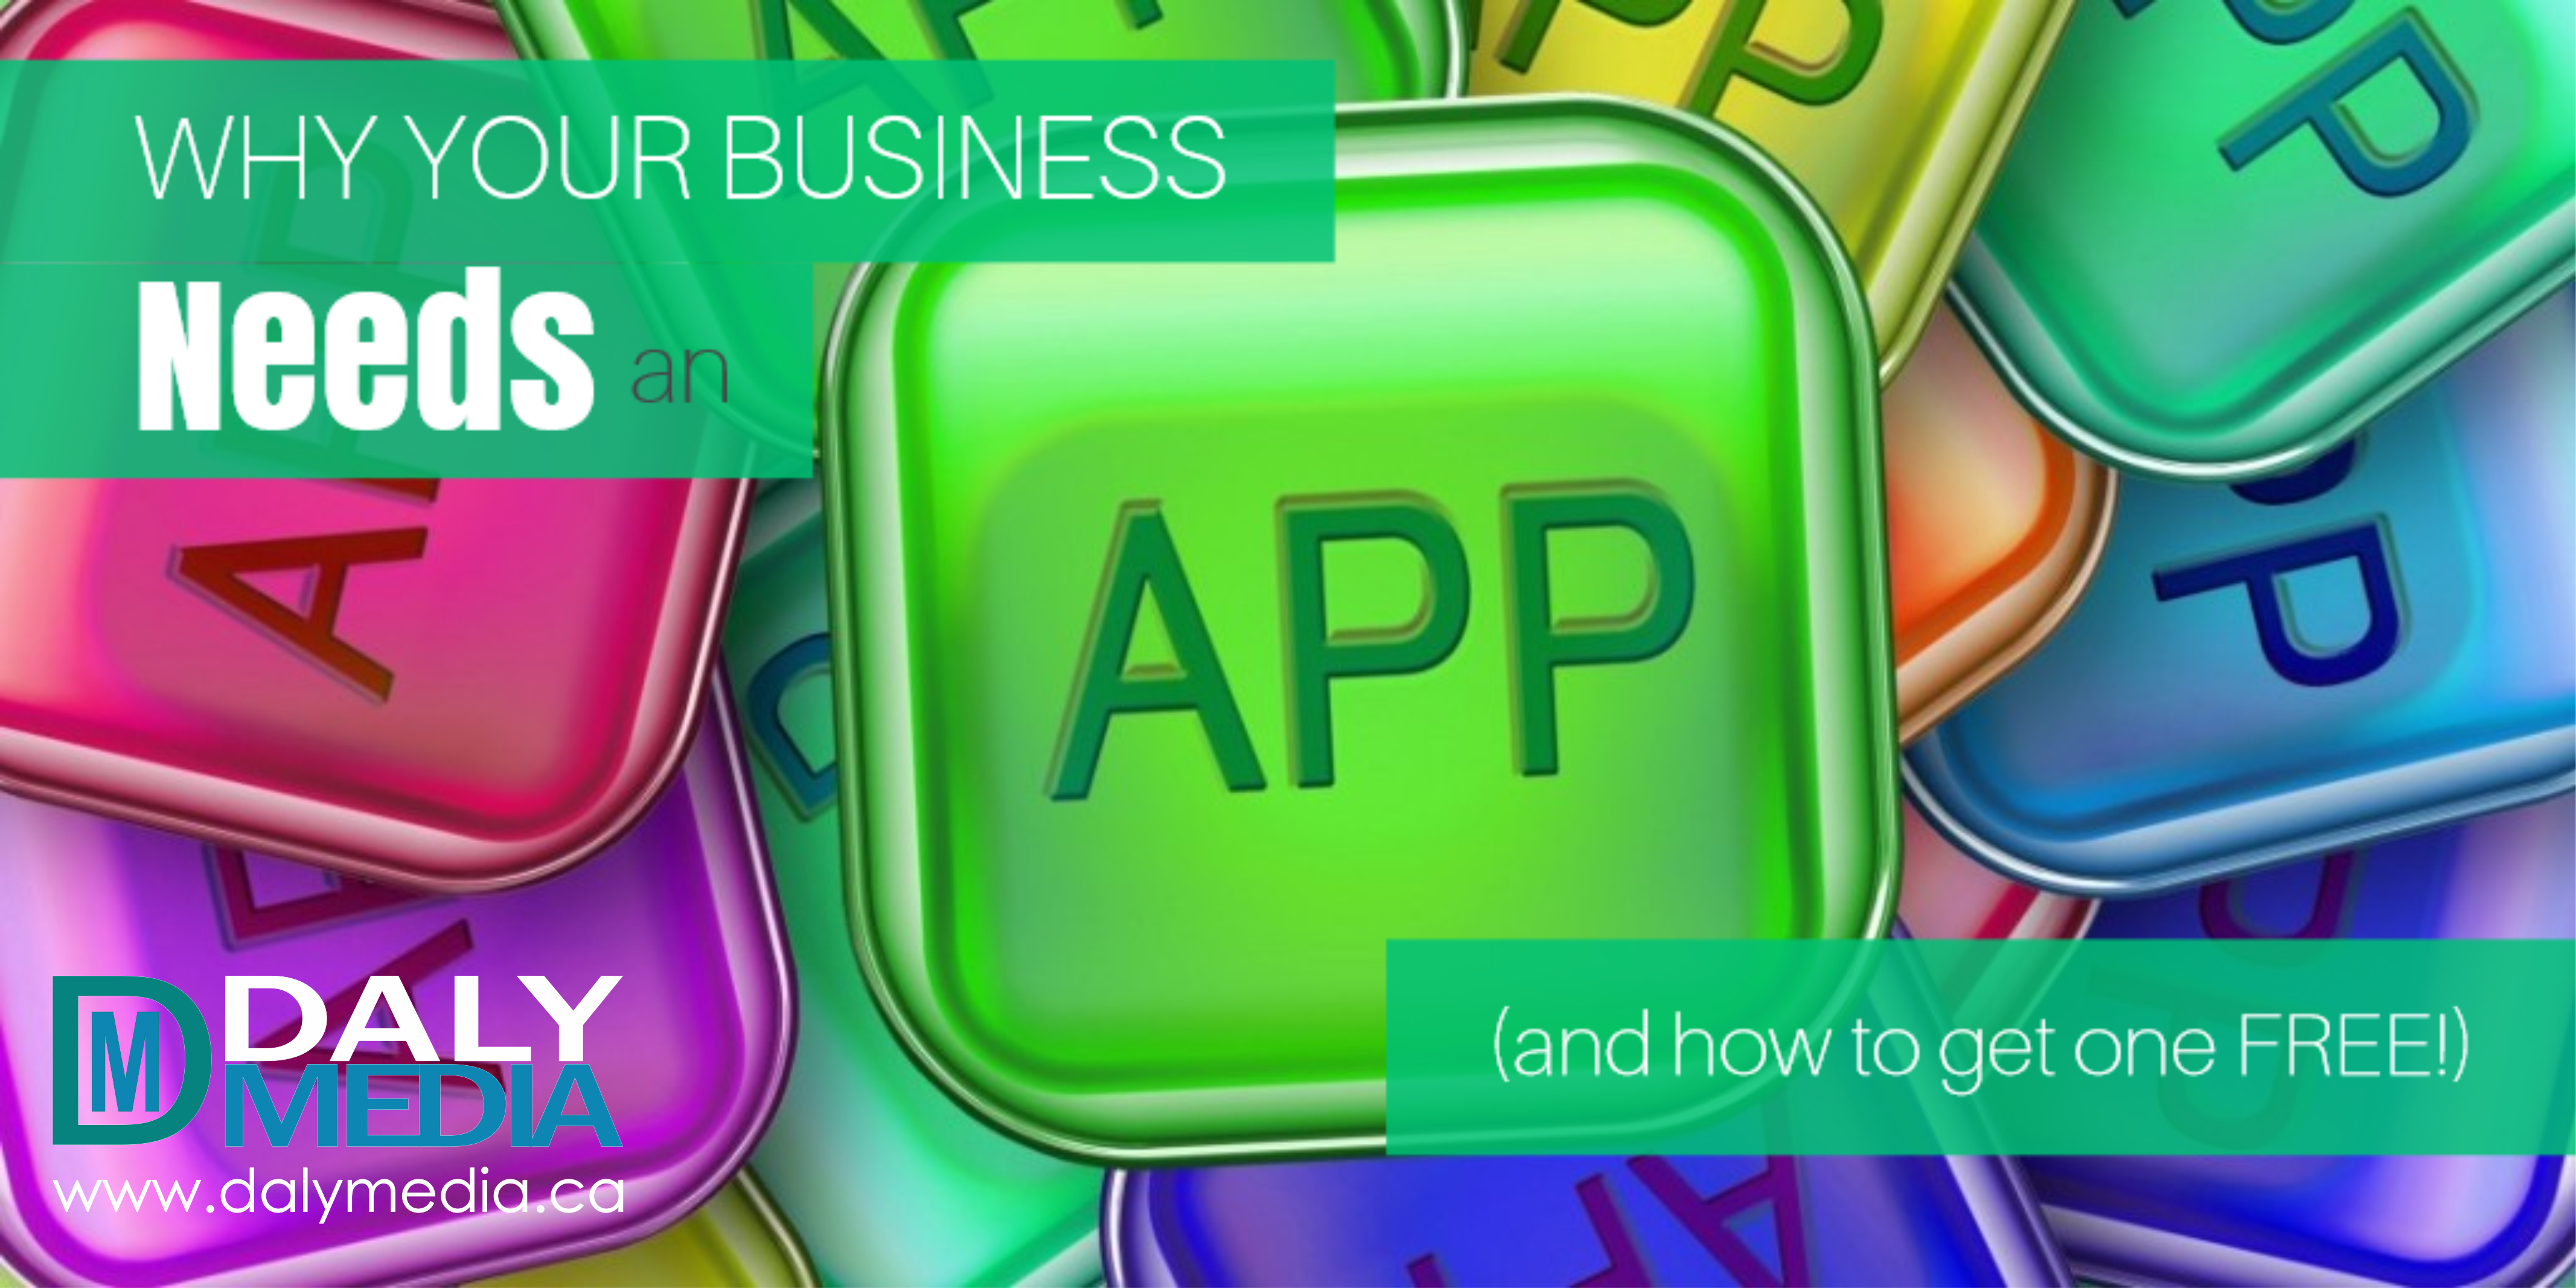 Why Your Business Needs an App